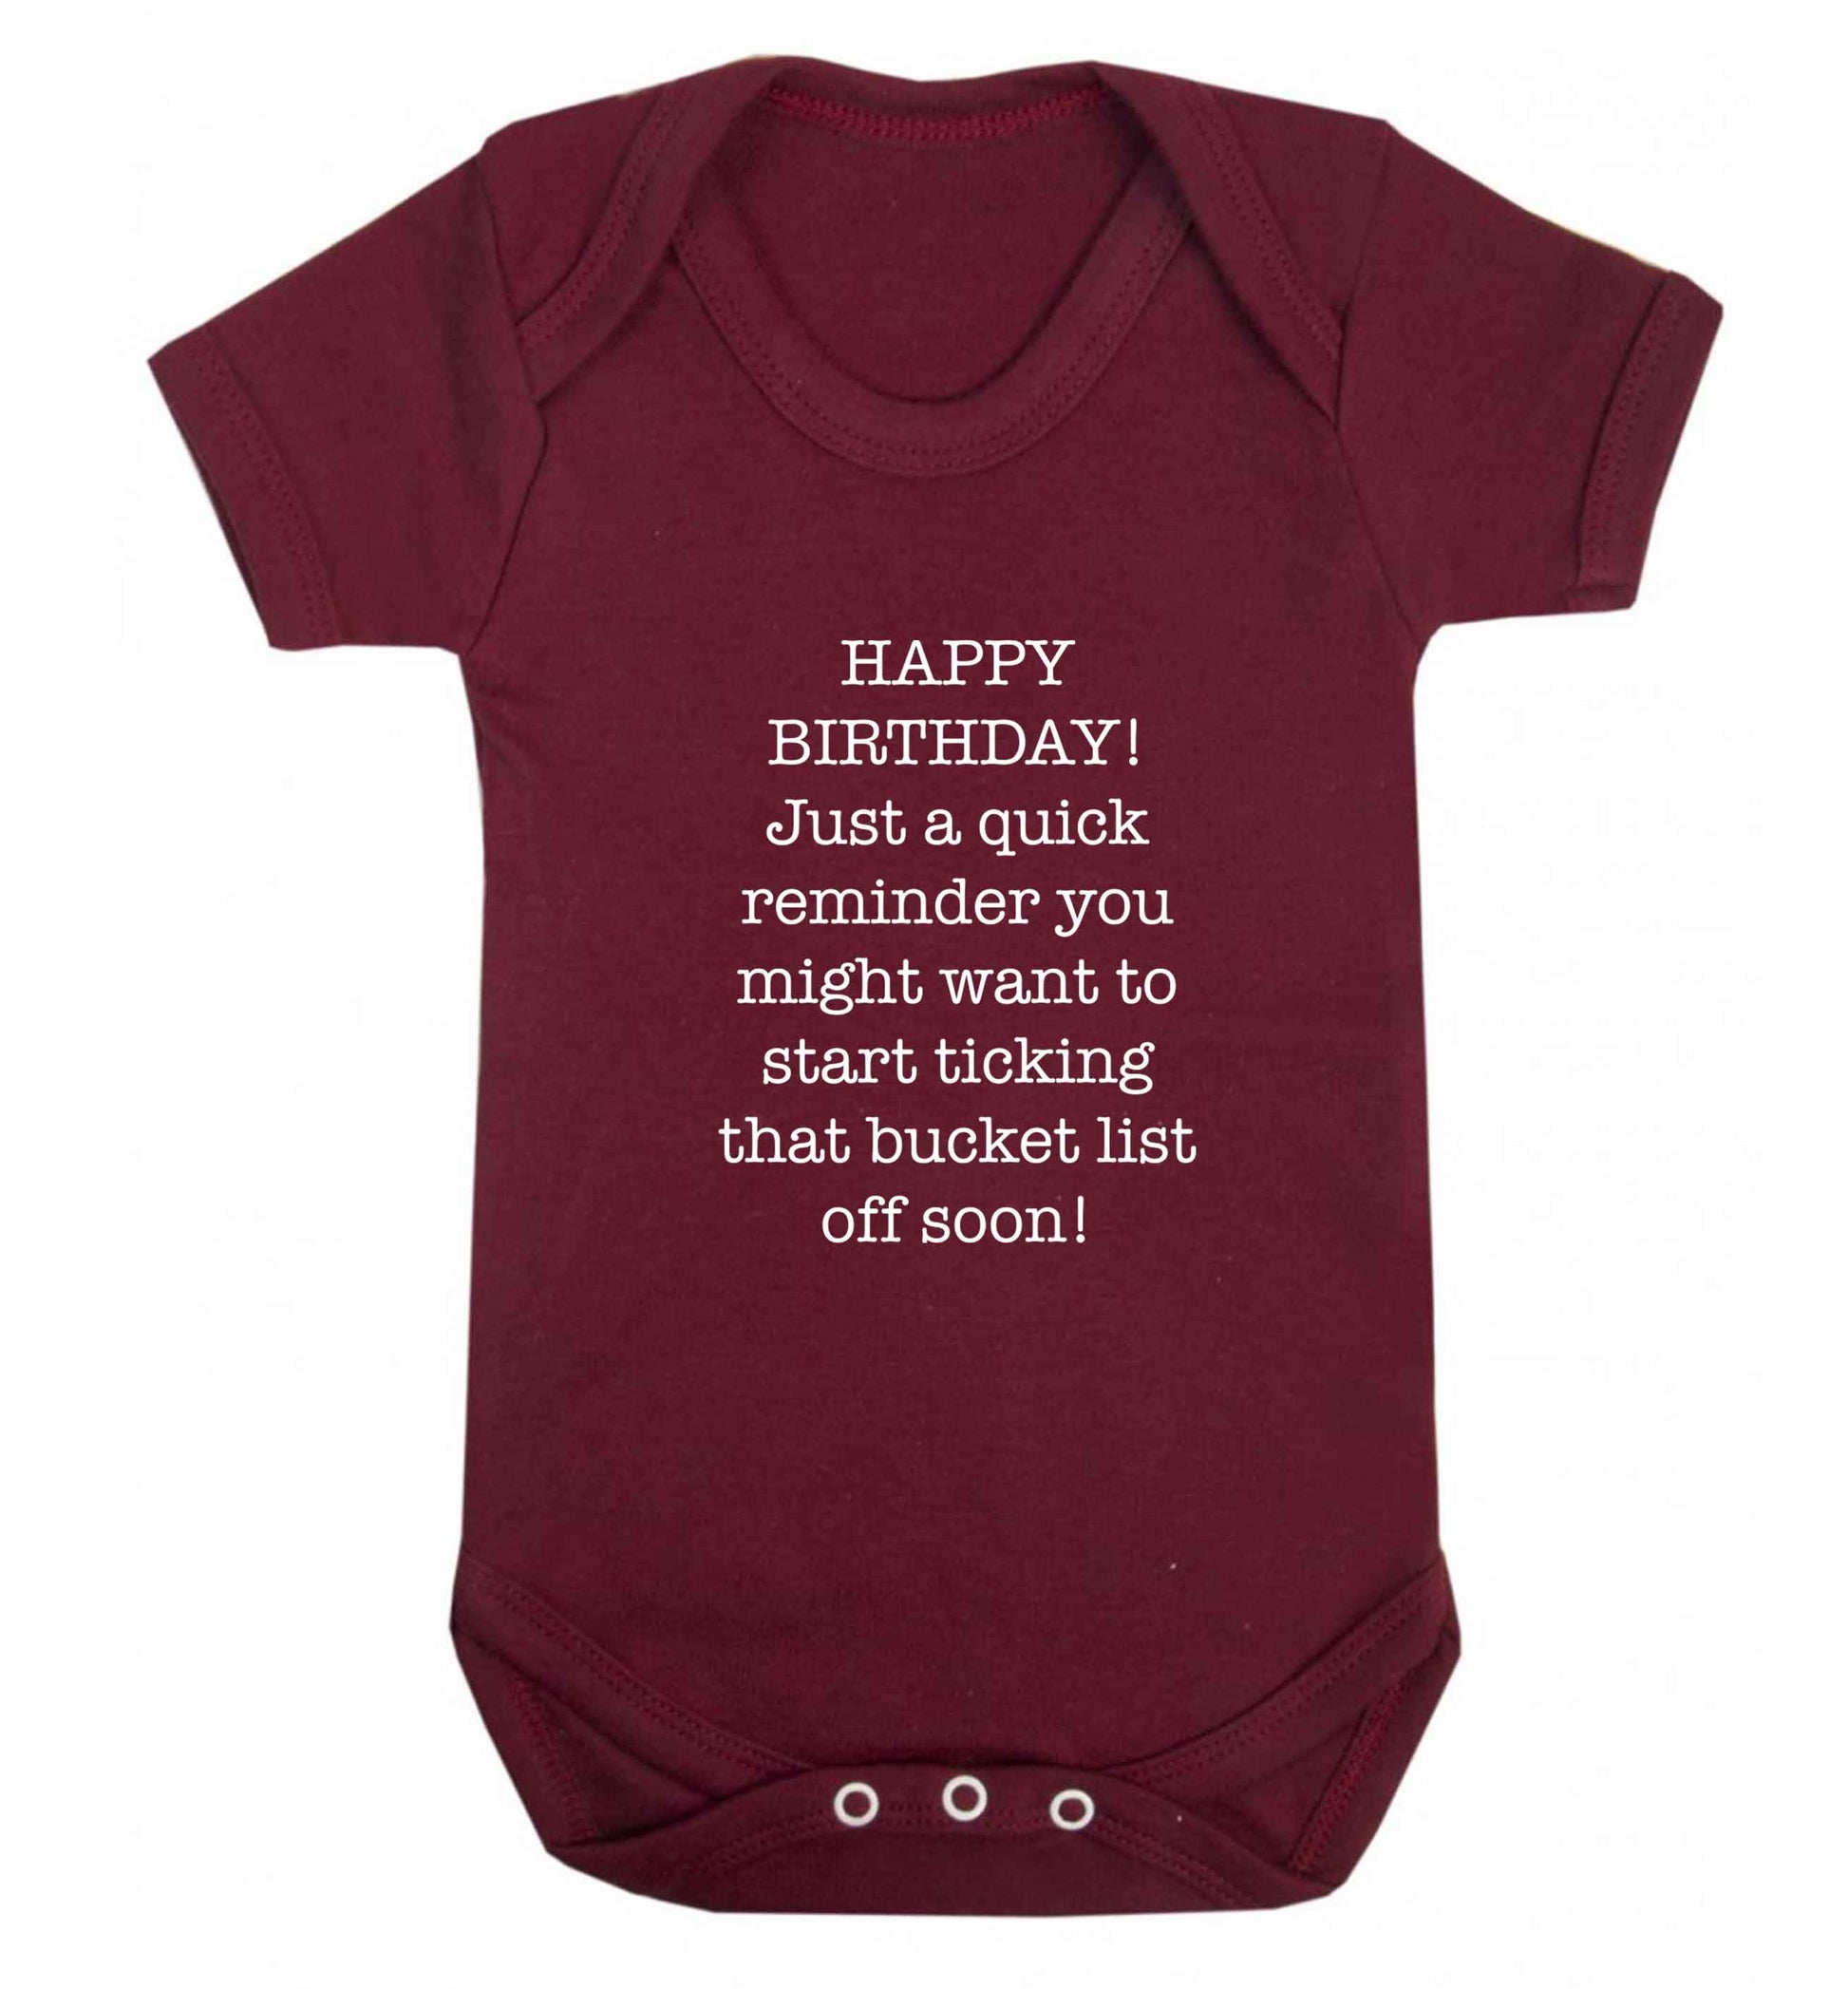 Happy birthday, just a quick reminder you might want to start ticking that bucket list off soon baby vest maroon 18-24 months